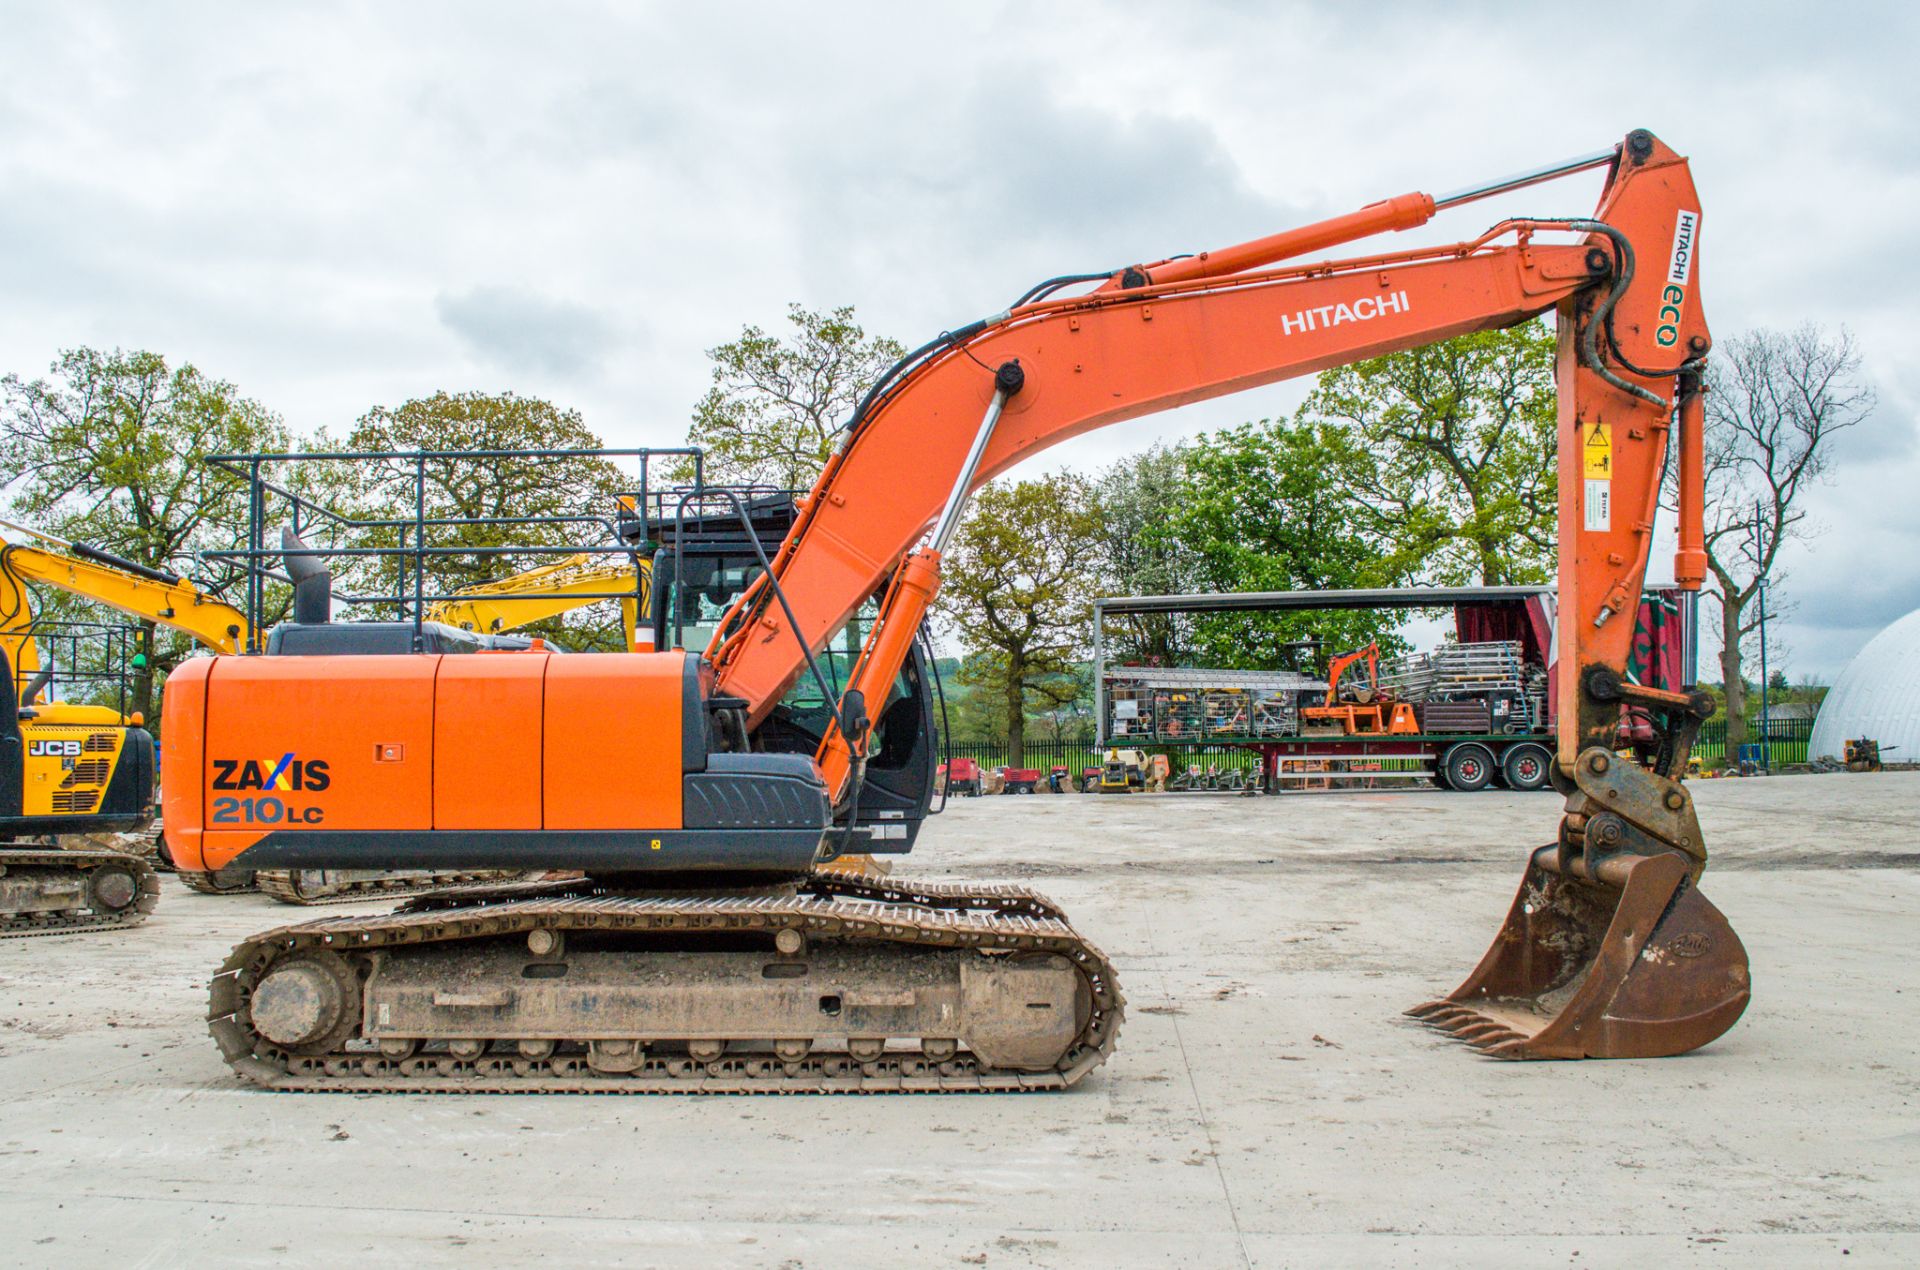 Hitachi ZX 210 LC 21 tonne steel tracked excavator Year: 2015 S/N: 303730 Recorded hours: 5549 Air - Image 8 of 22